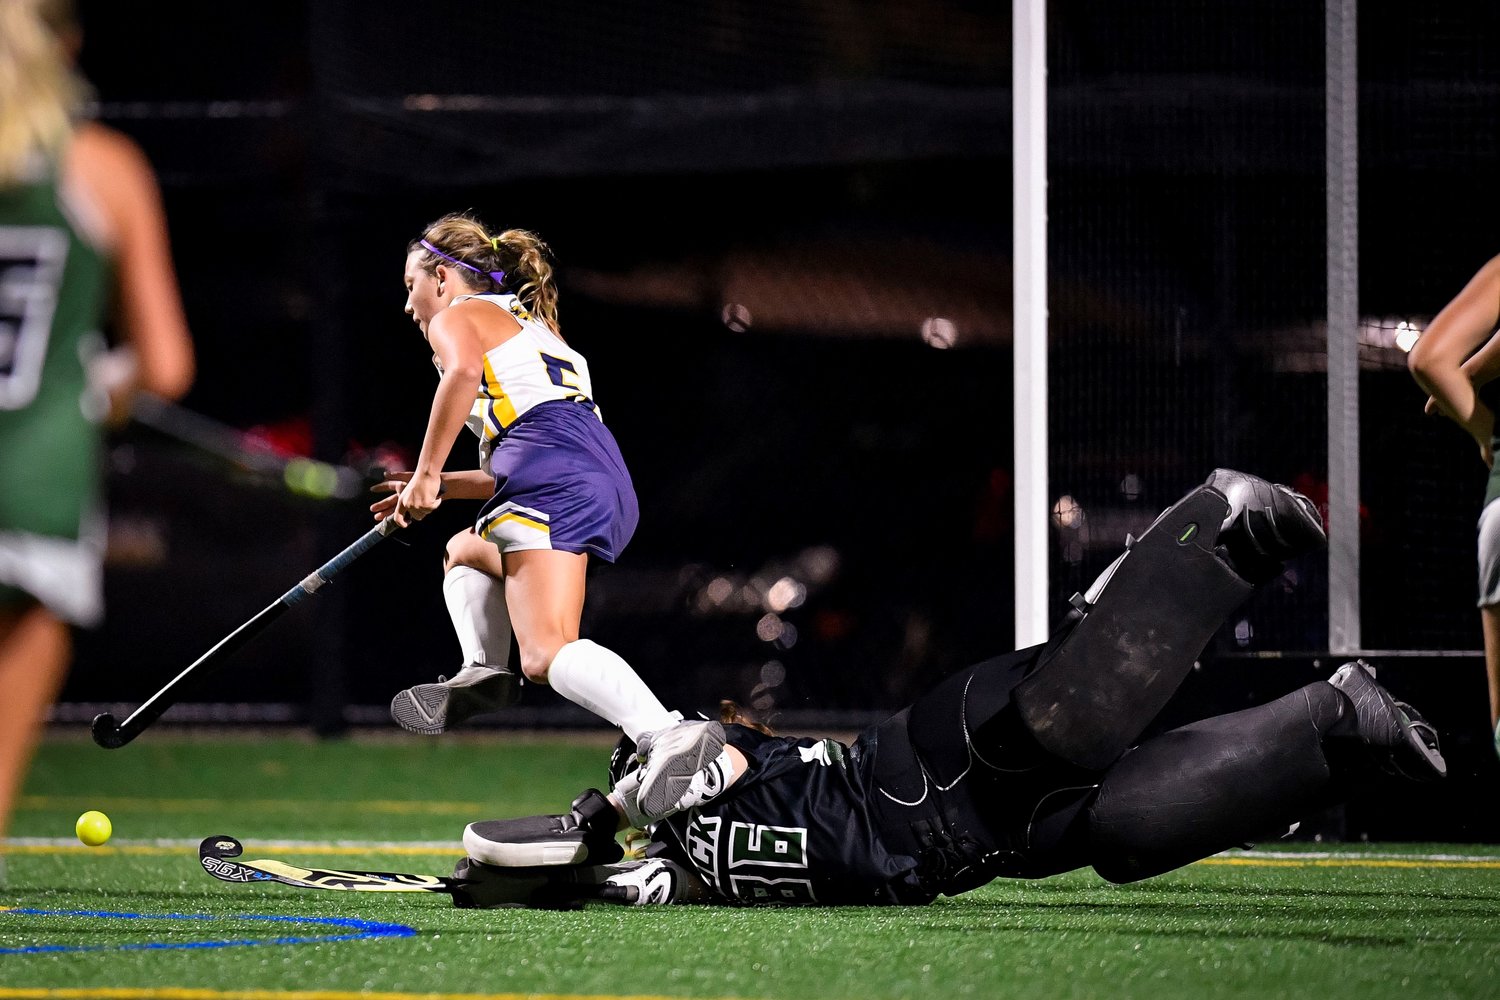 New Hope-Solebury’s Ava Cozza jumps over Dock goalie Haley Harper as she tries to get a shot late in the fourth quarter.